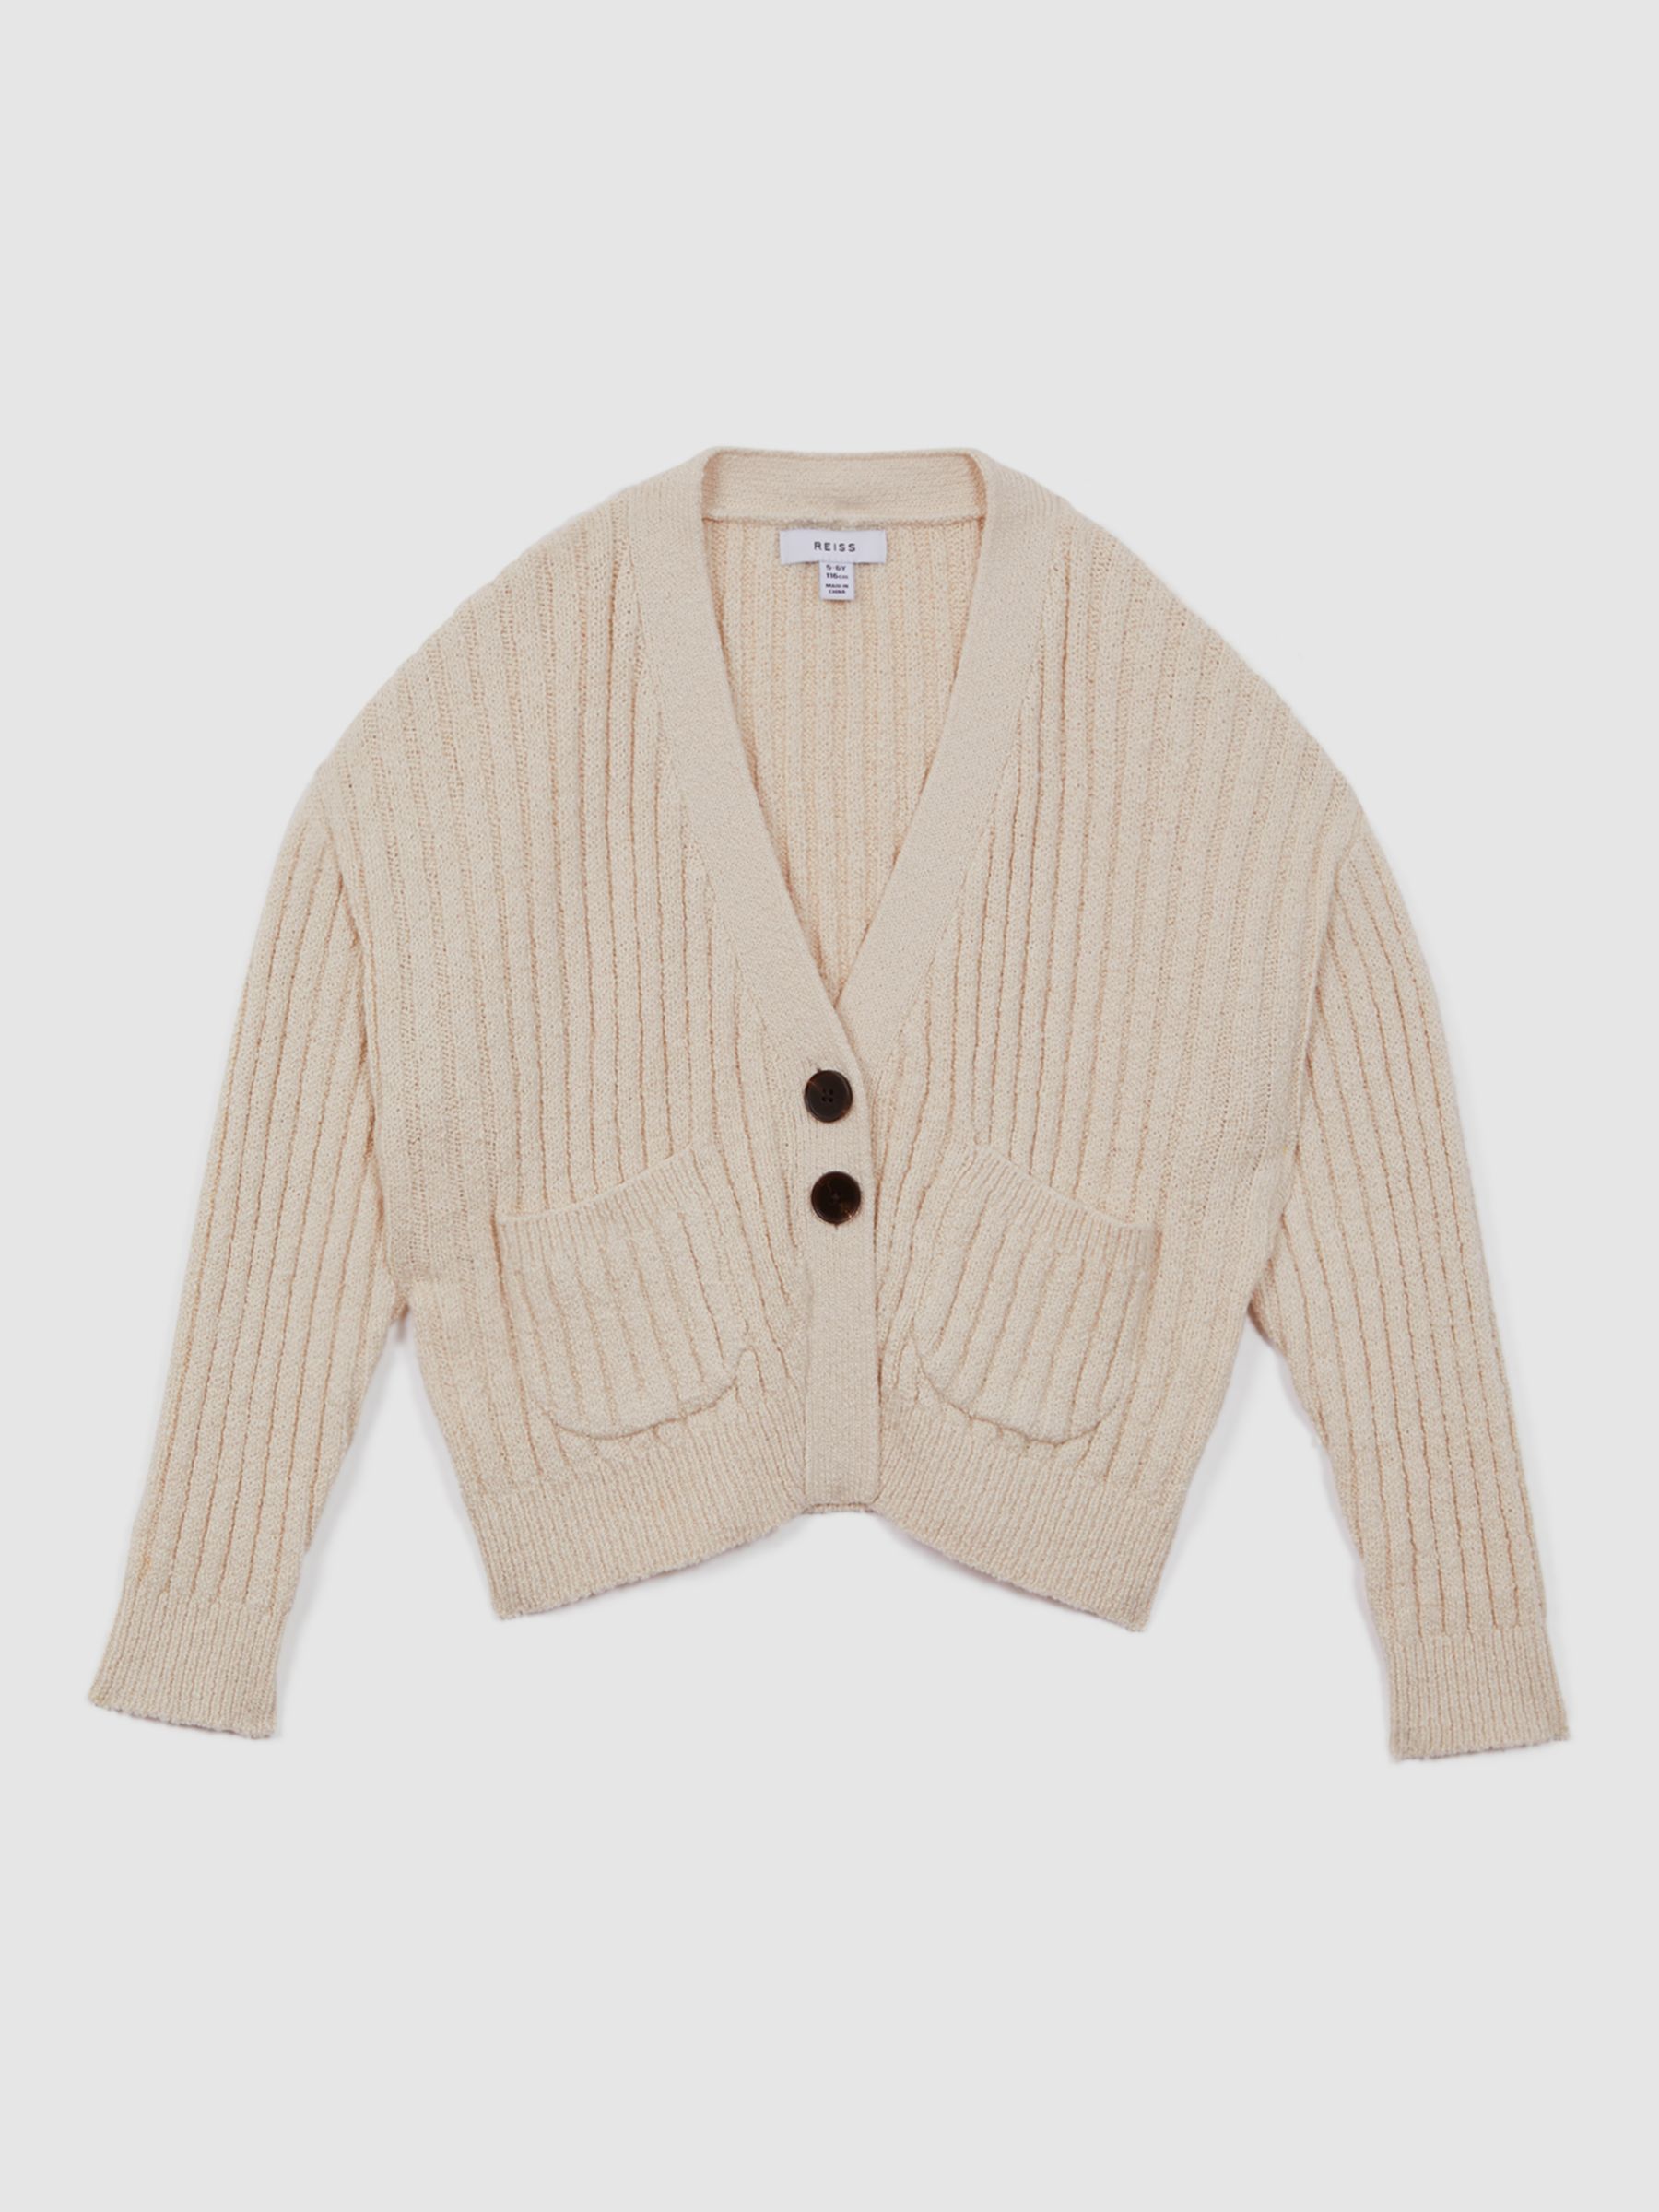 Buy Reiss Kids' Anabelle Cord Knitted Cardigan, Ivory Online at johnlewis.com